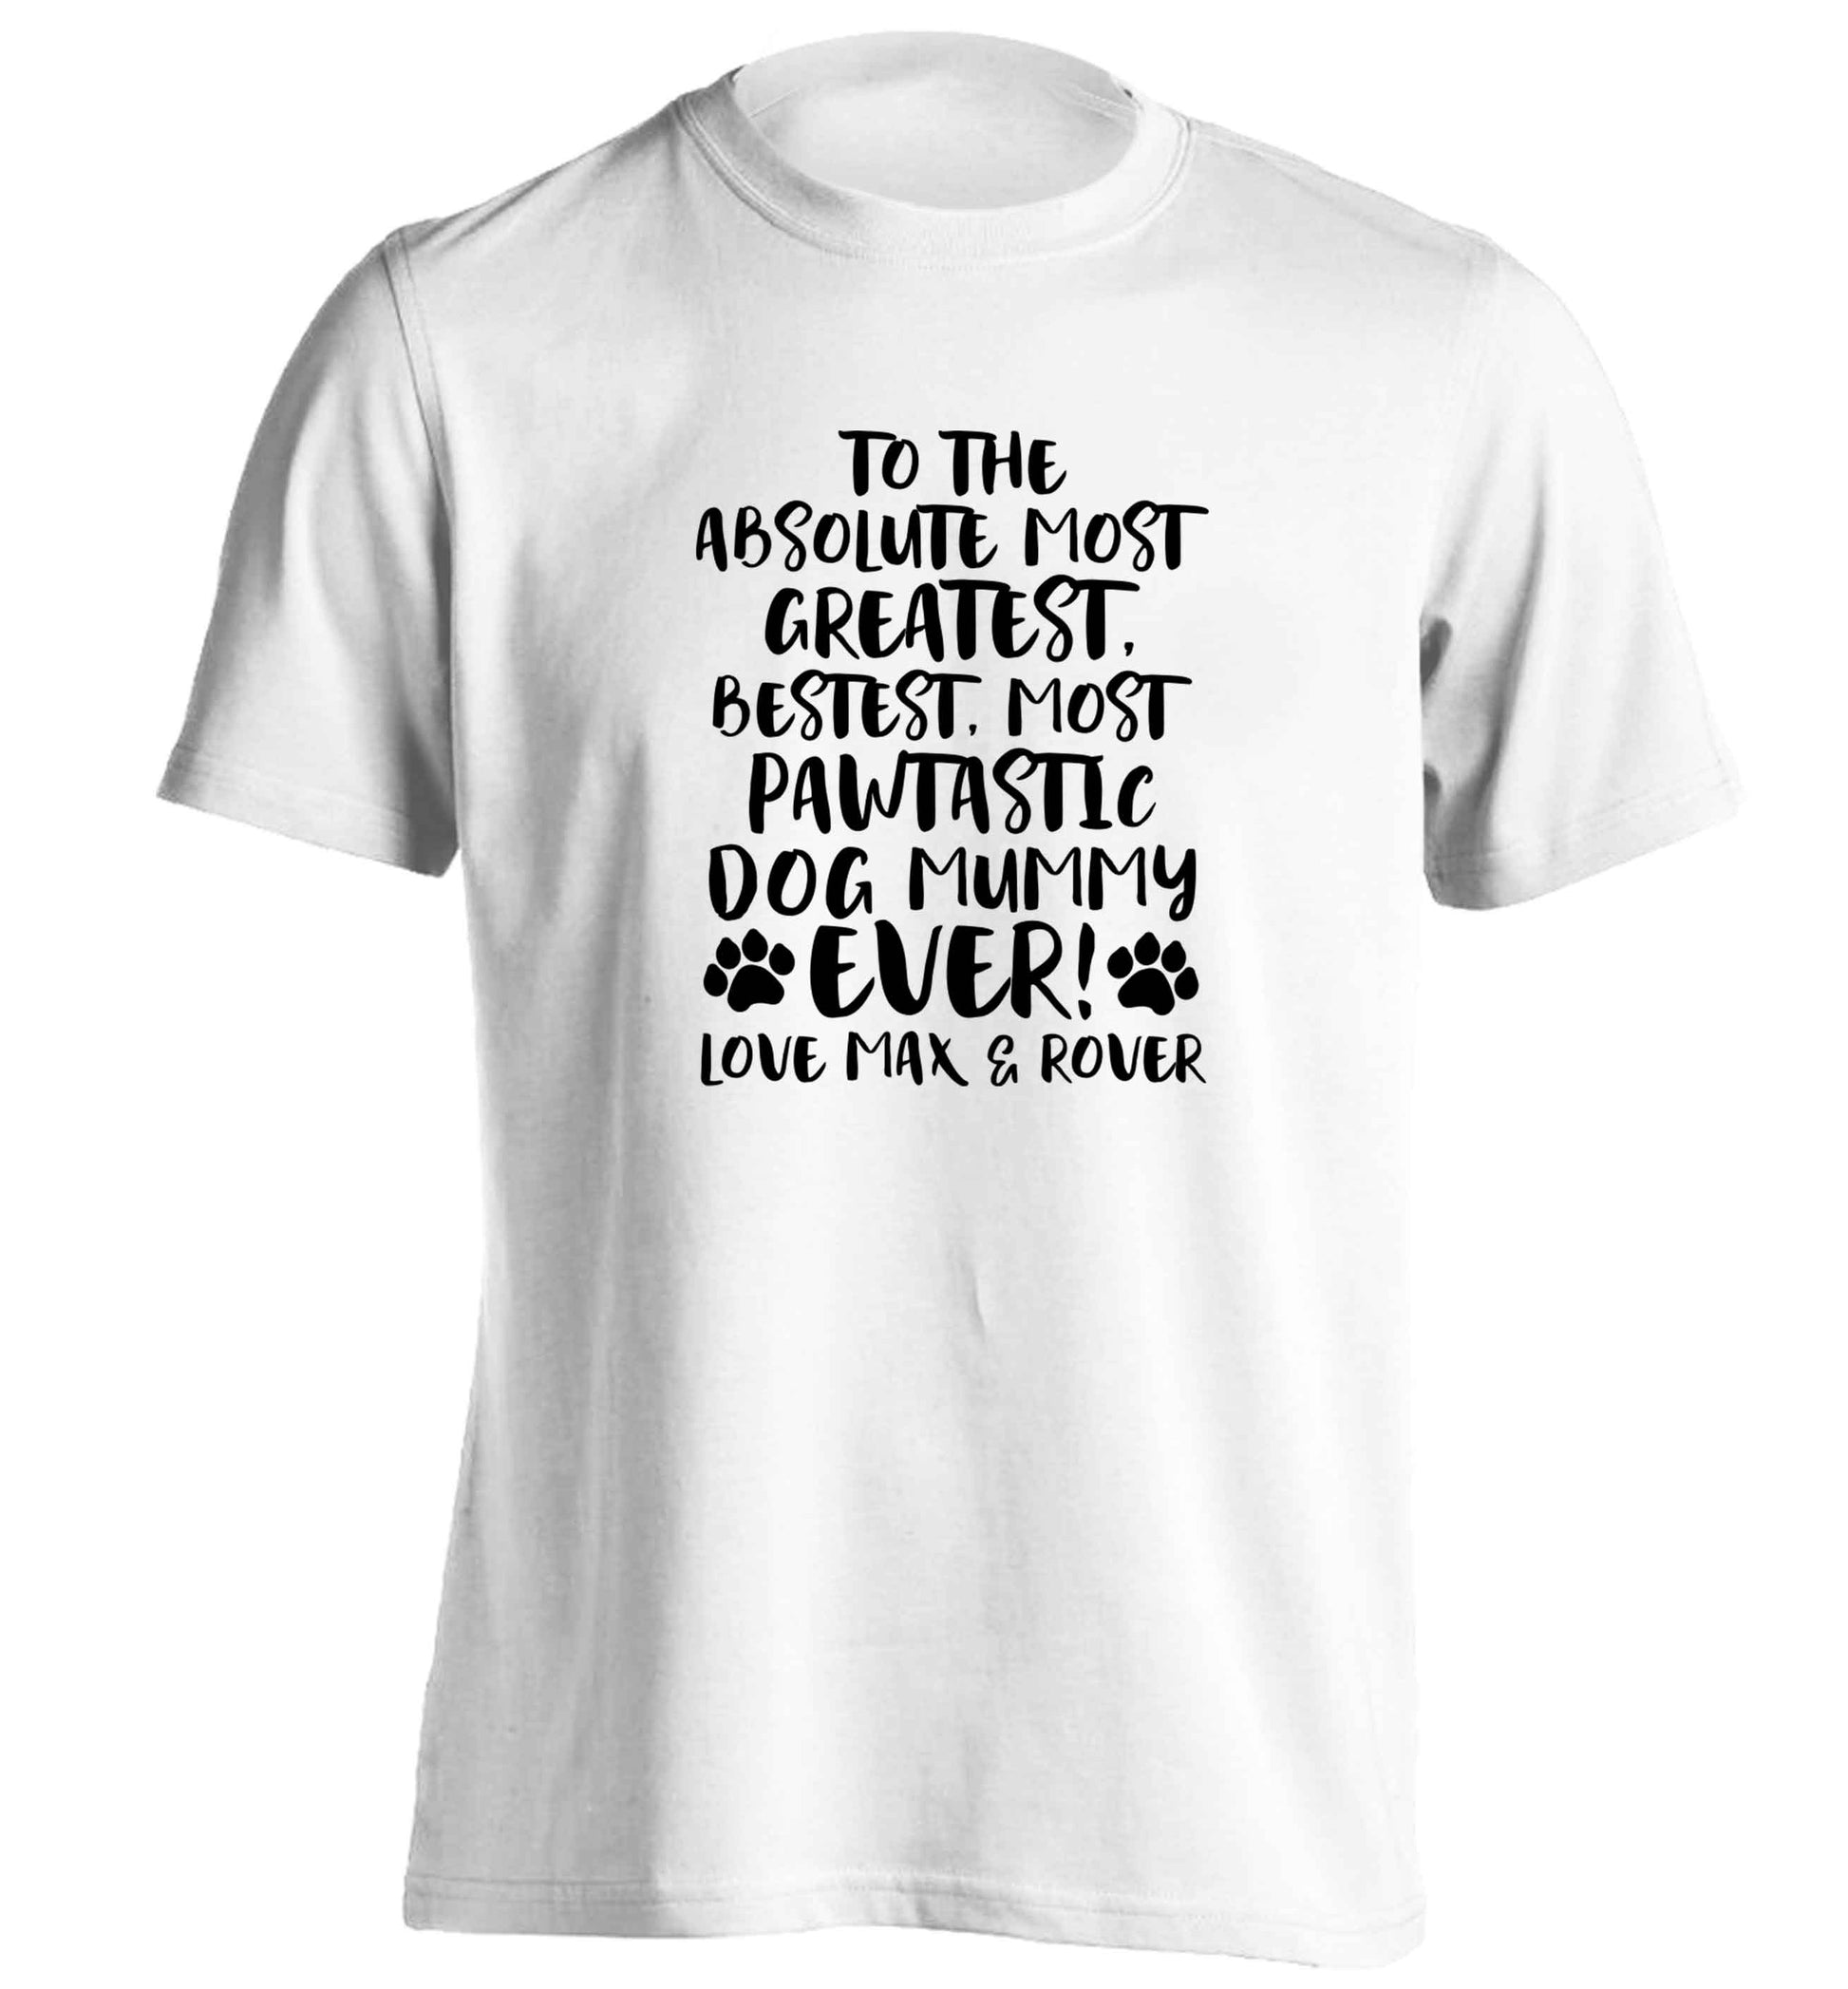 Personalsied to the most pawtastic dog mummy ever adults unisex white Tshirt 2XL